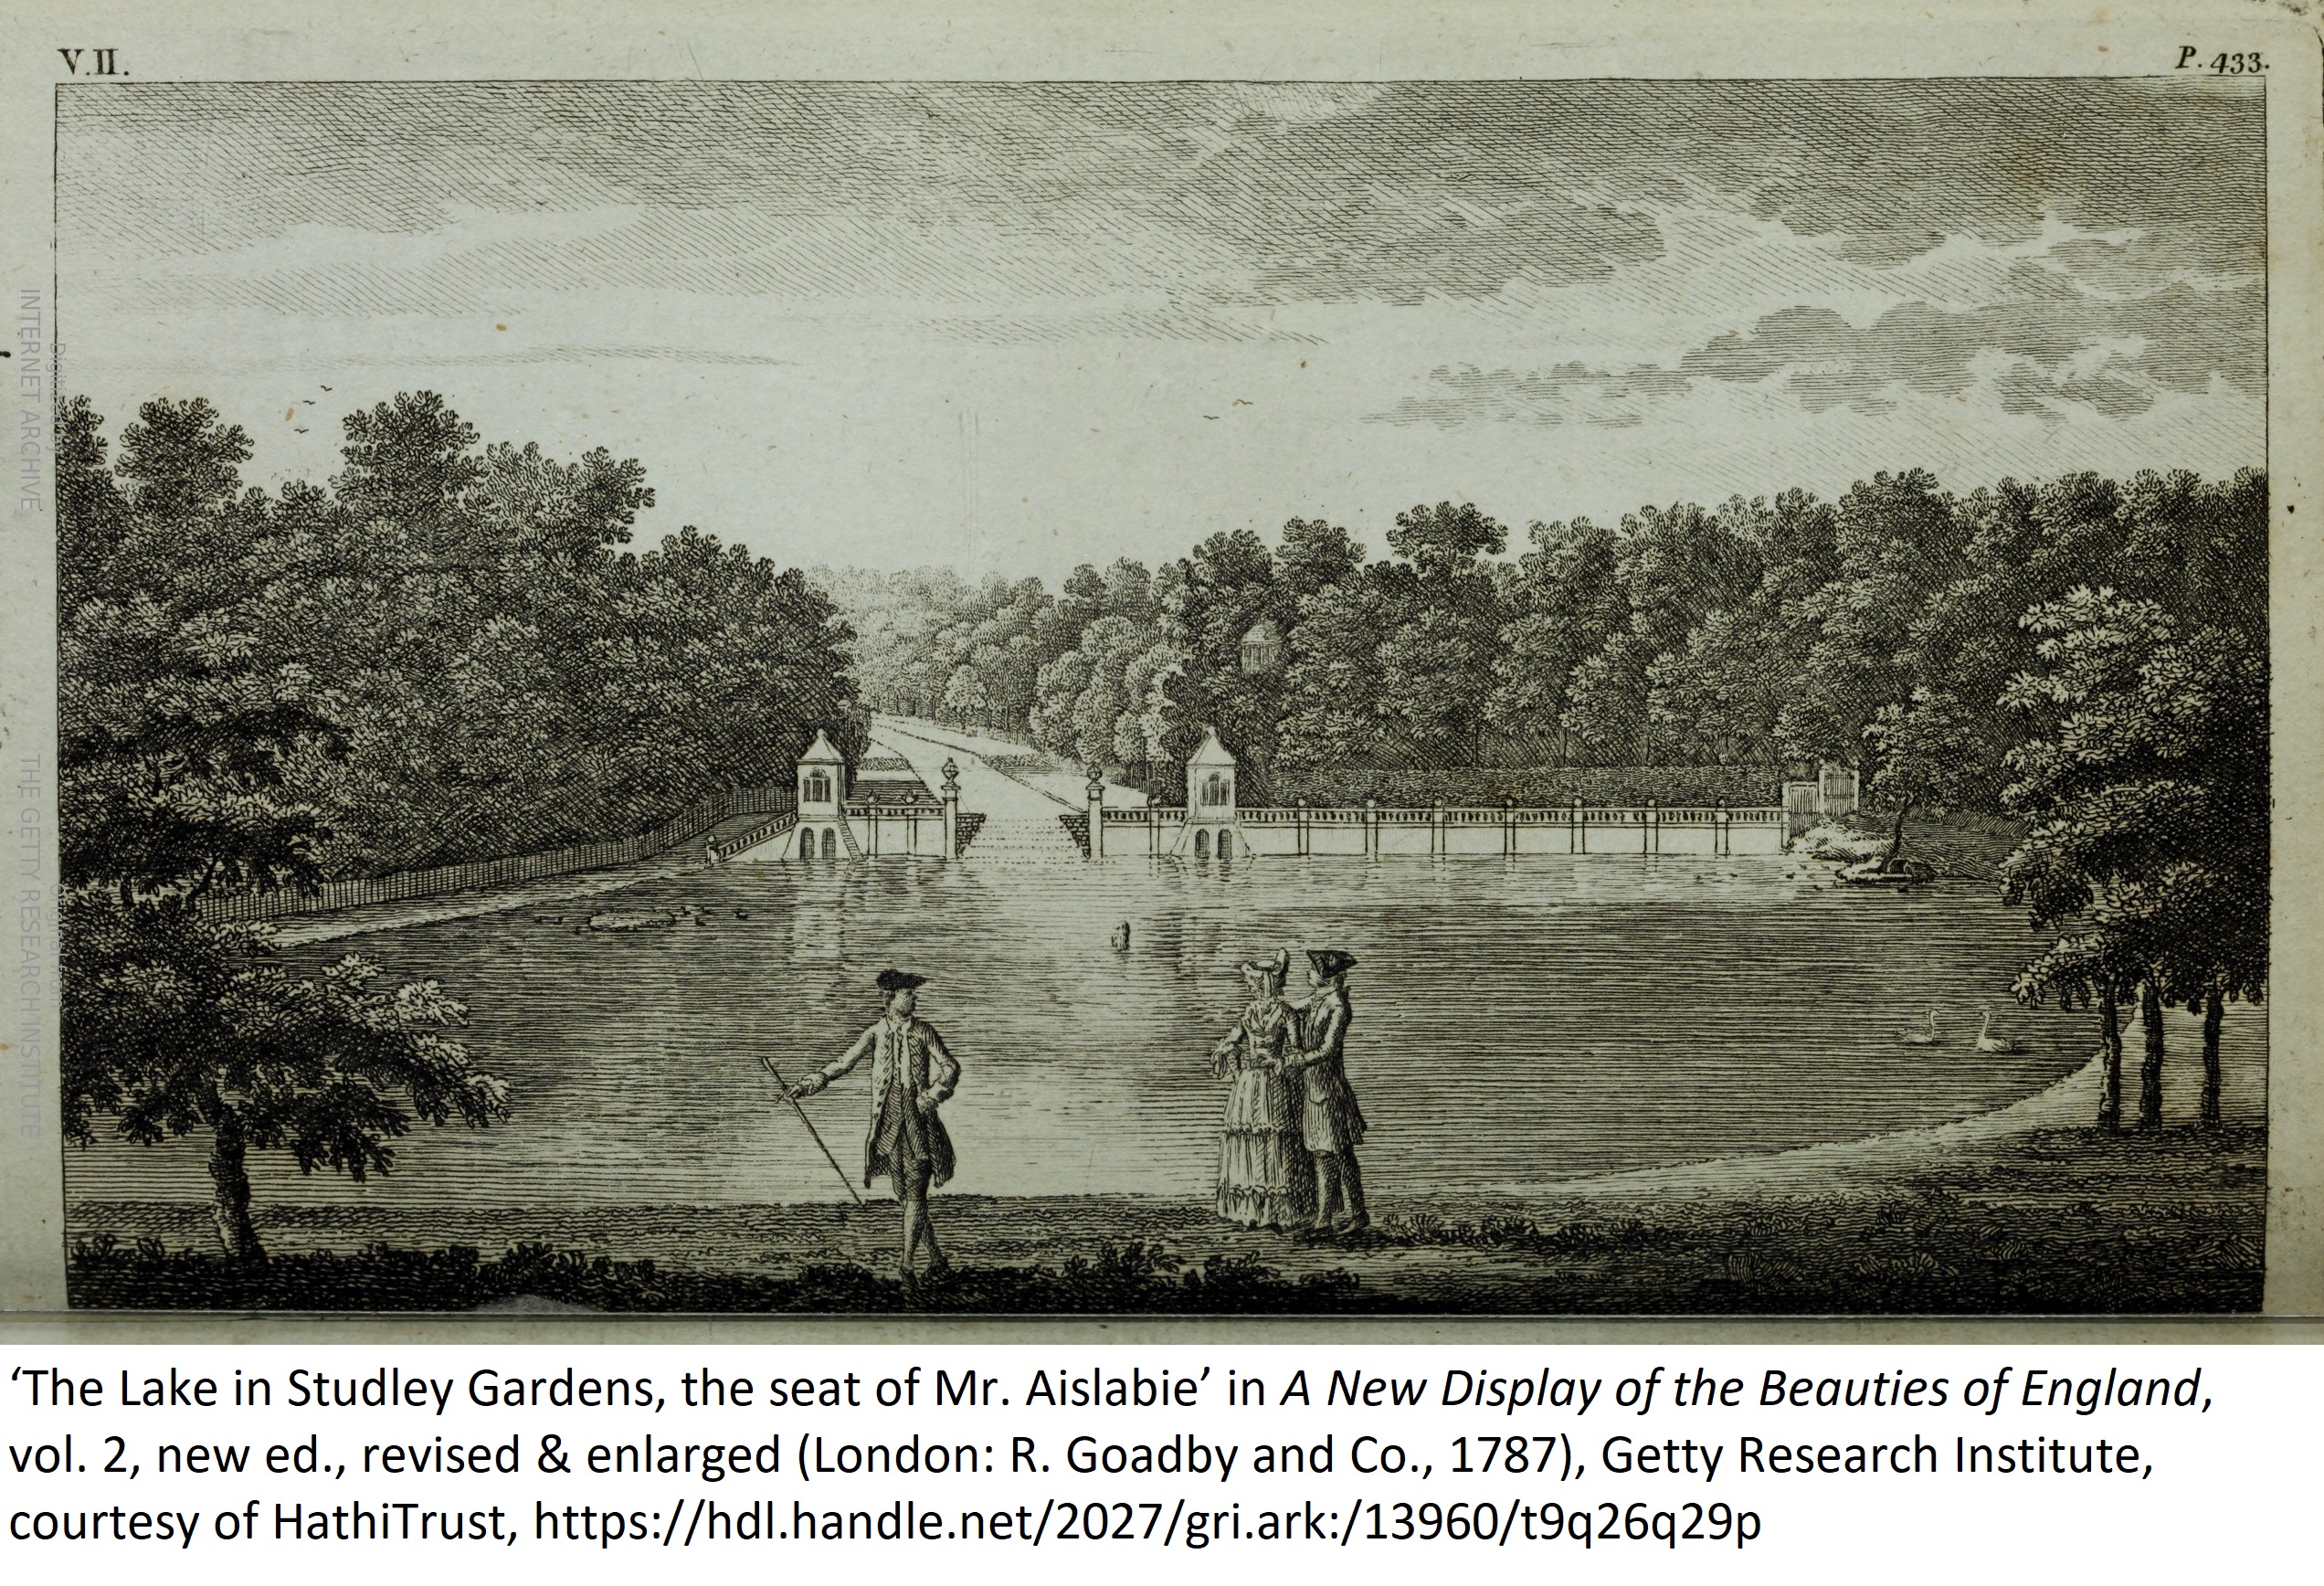 ‘The Lake in Studley Gardens, the seat of Mr. Aislabie’ in A New Display of the Beauties of England, vol. 2, new ed., revised & enlarged (London: R. Goadby and Co., 1787), Getty Research Institute, courtesy of HathiTrust, https://hdl.handle.net/2027/gri.ark:/13960/t9q26q29p 